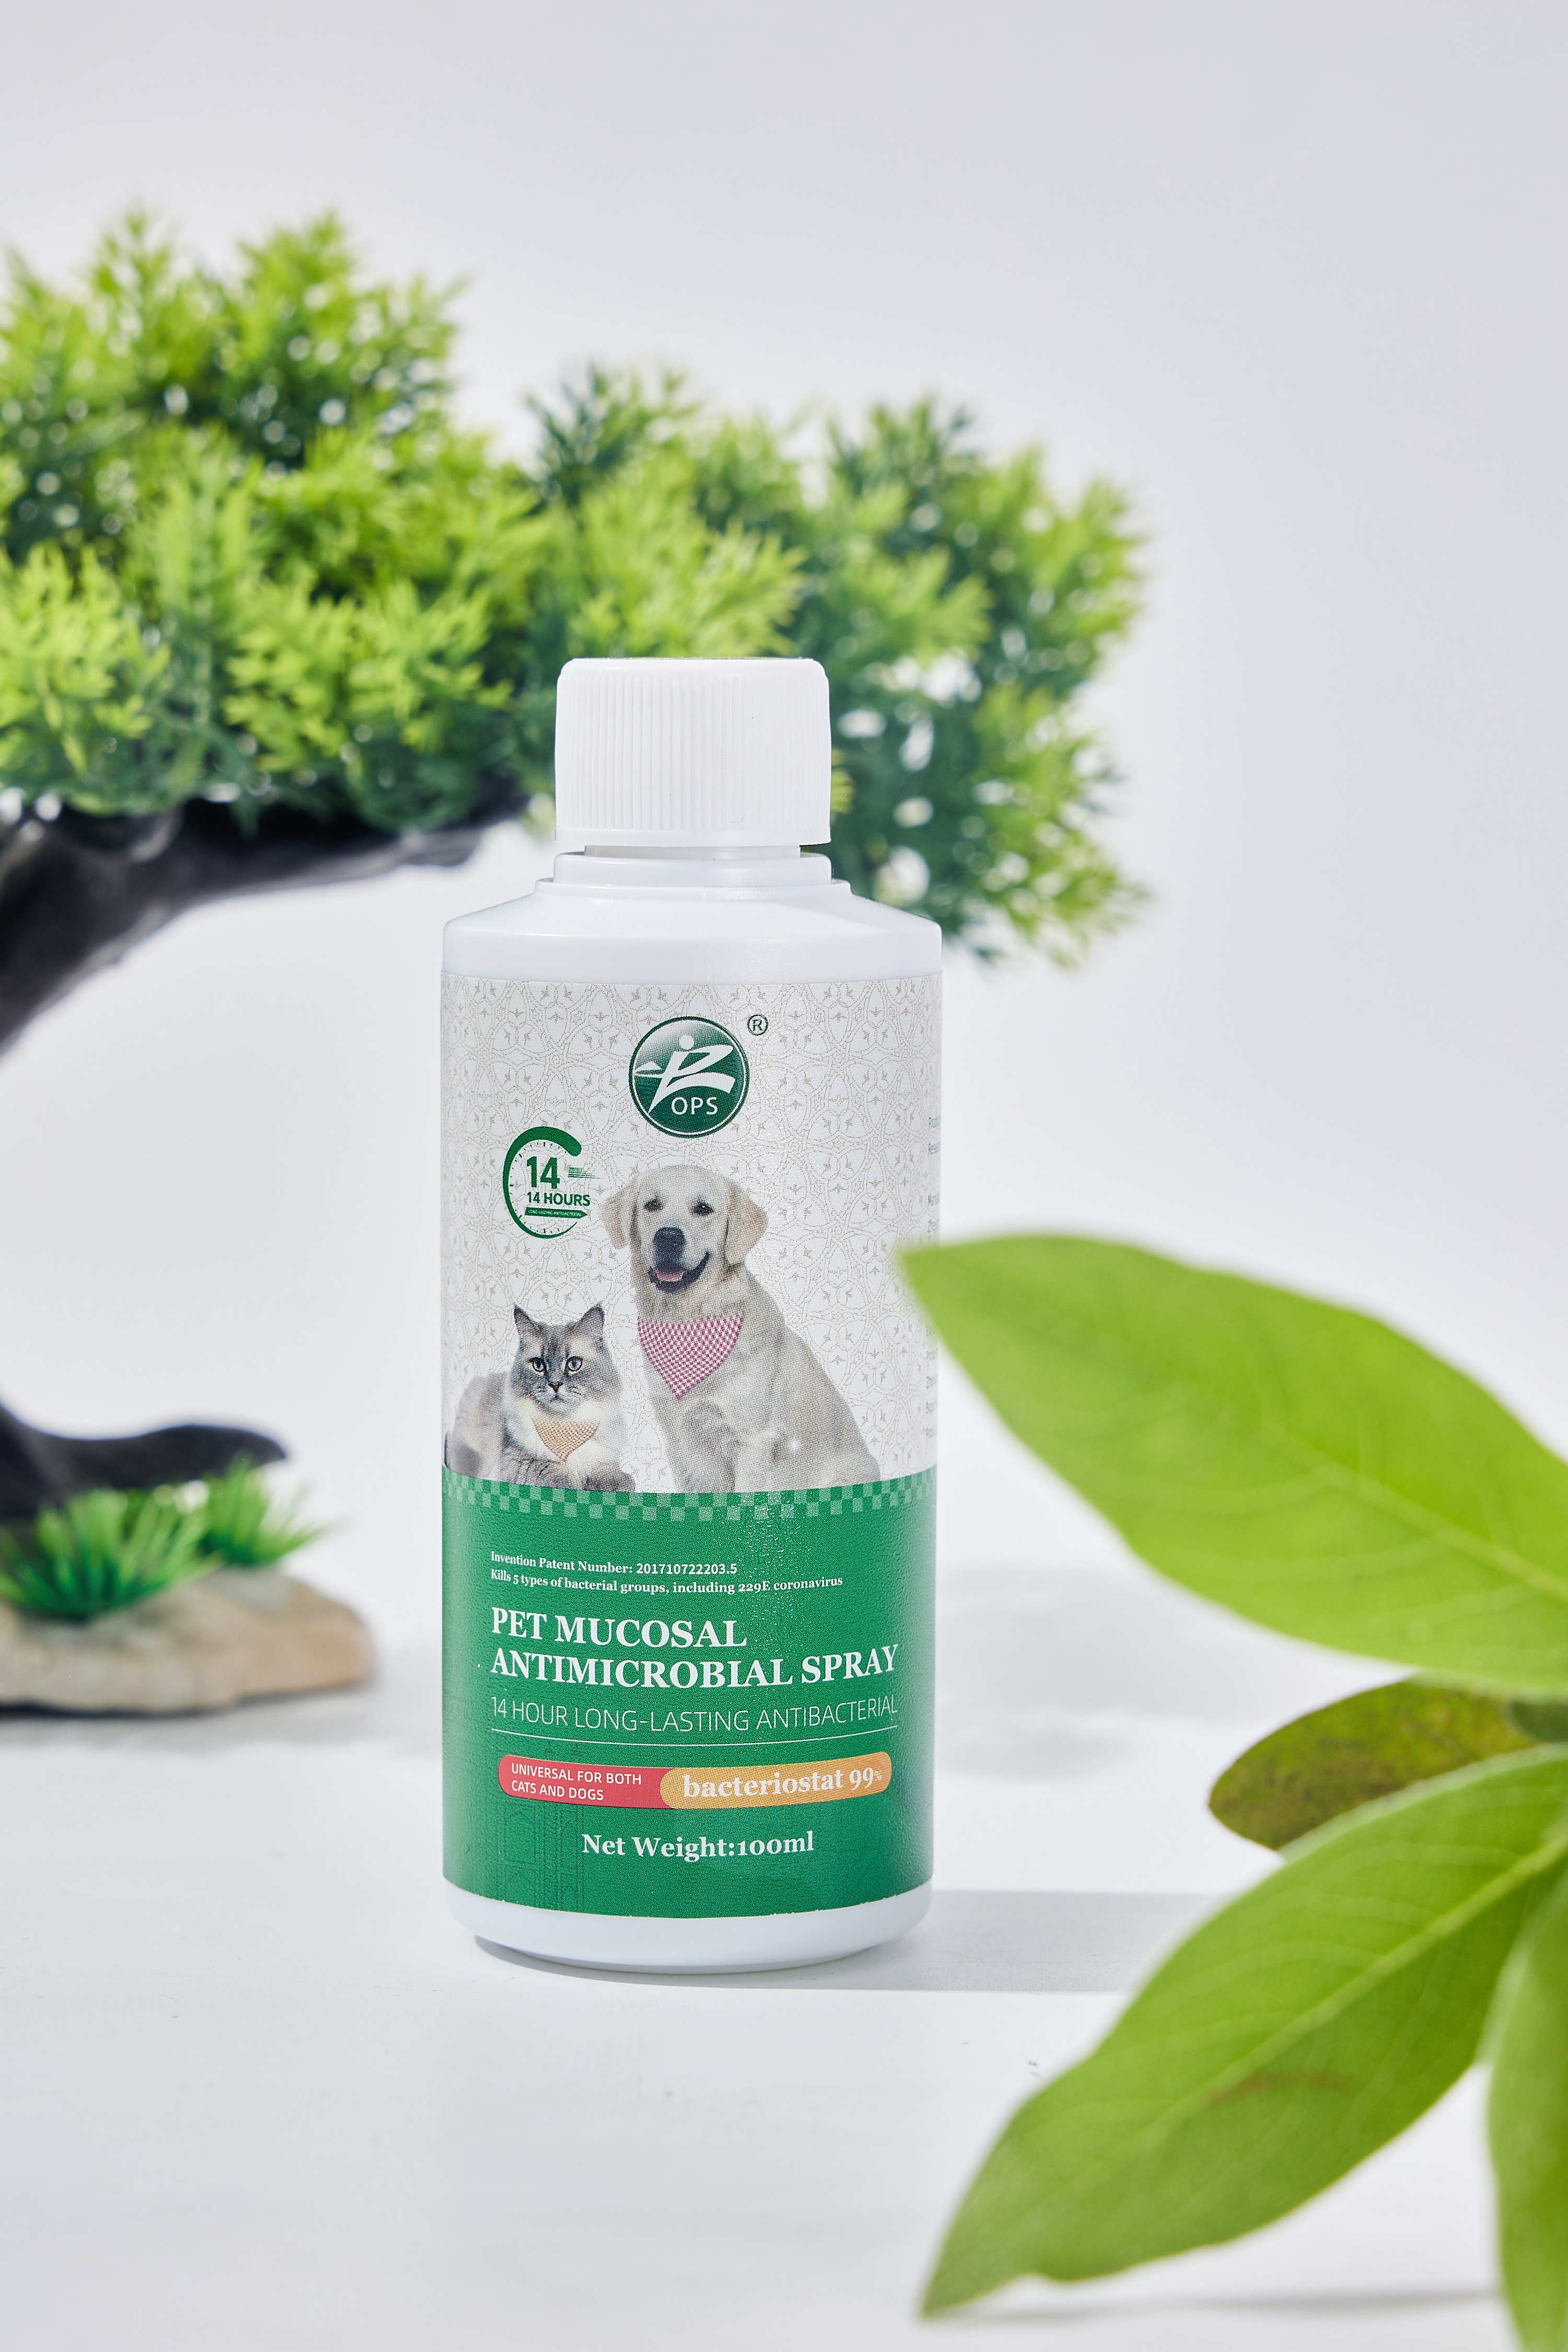 Enhanced Pet Mucous Care with Antimicrobial Spray Solution